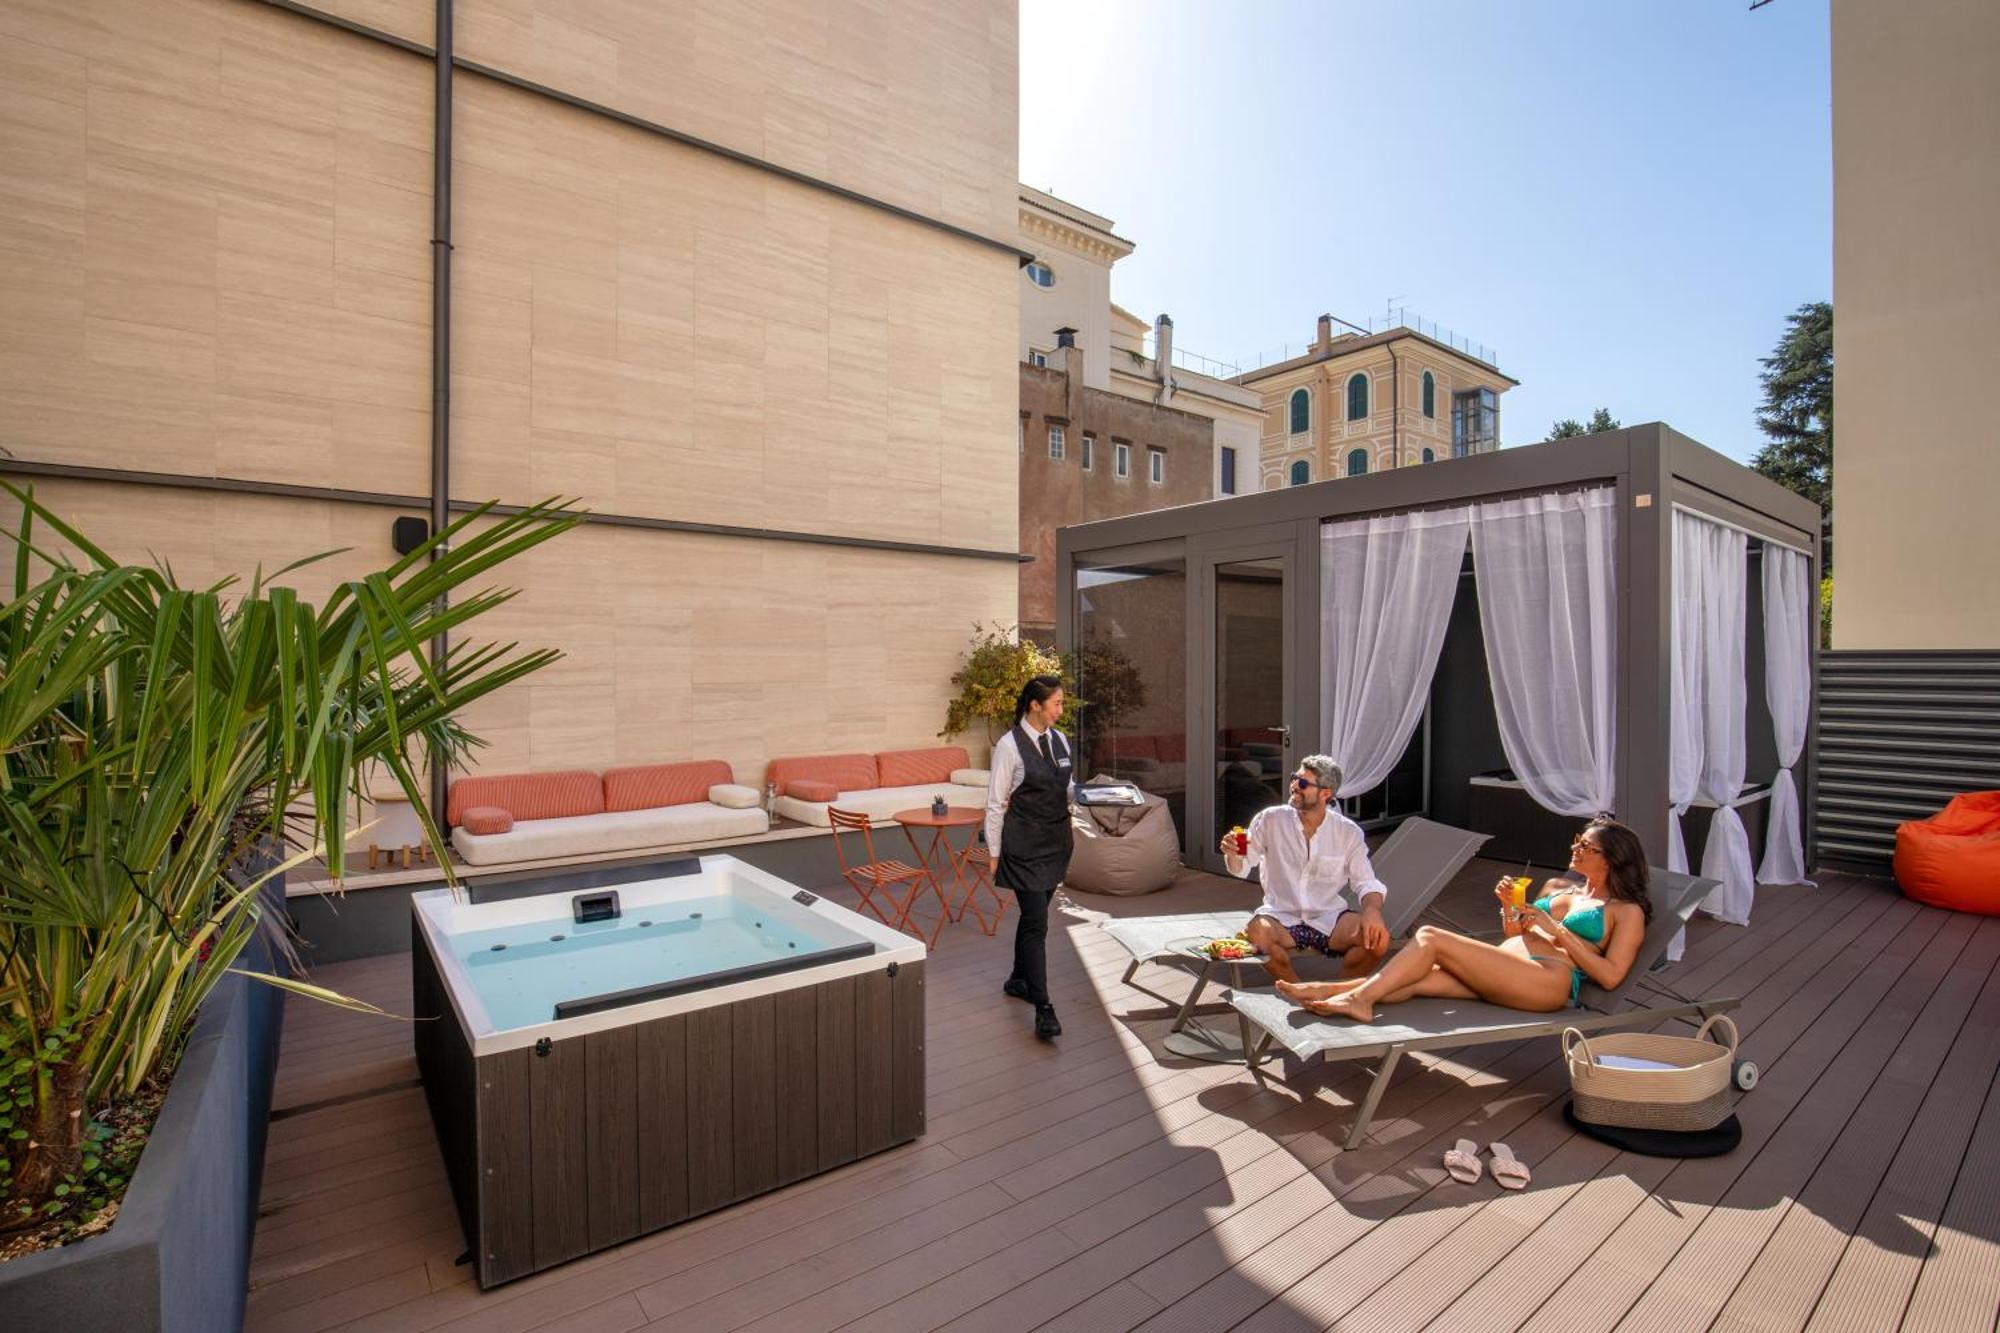 Best Western Plus Hotel Spring House Roma Exterior foto